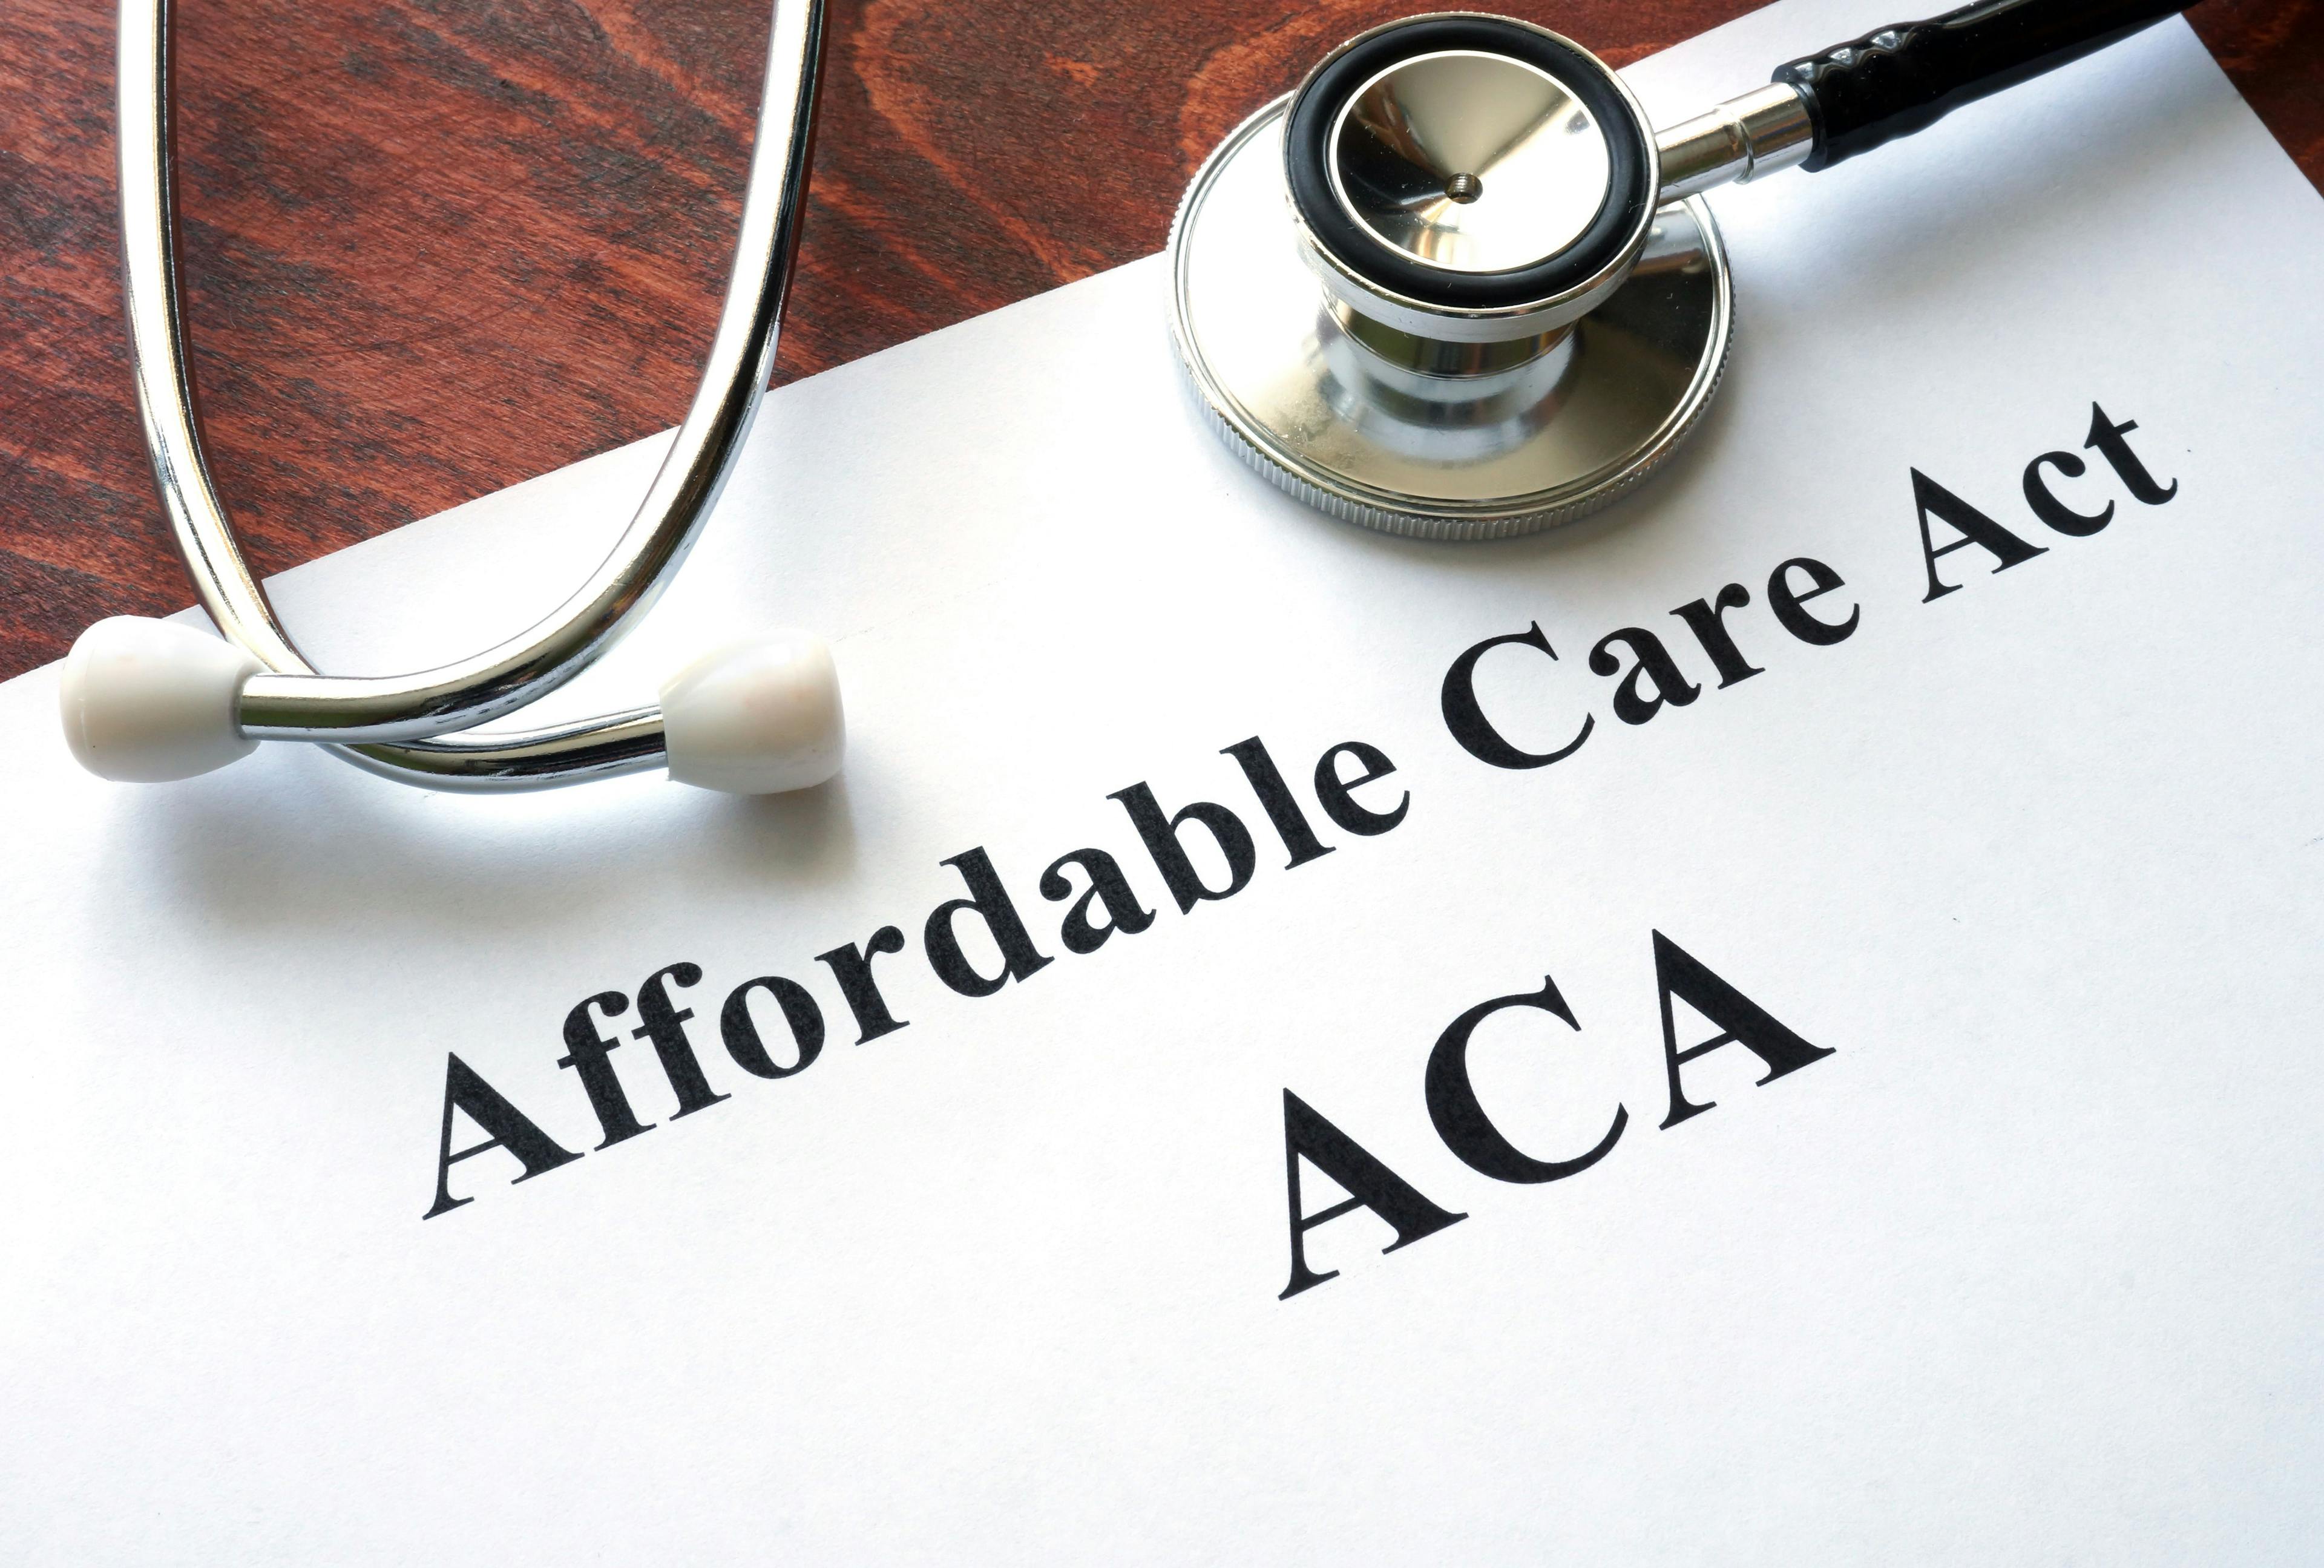 Biden's ACA special enrollment period might be good for marketplace plan risk pool